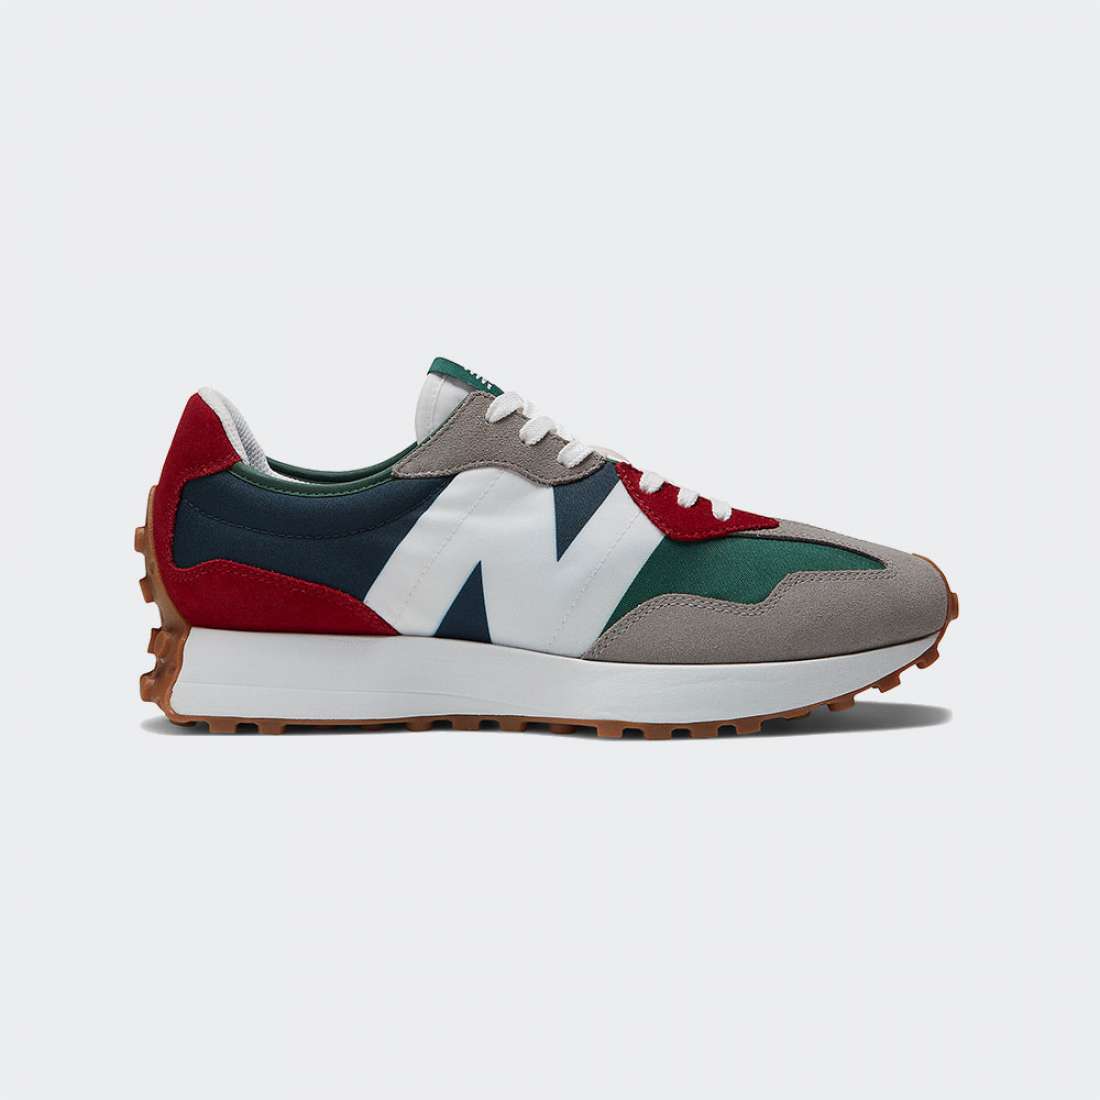 NEW BALANCE 327 MARBLEHEAD/TEAM FOREST GN